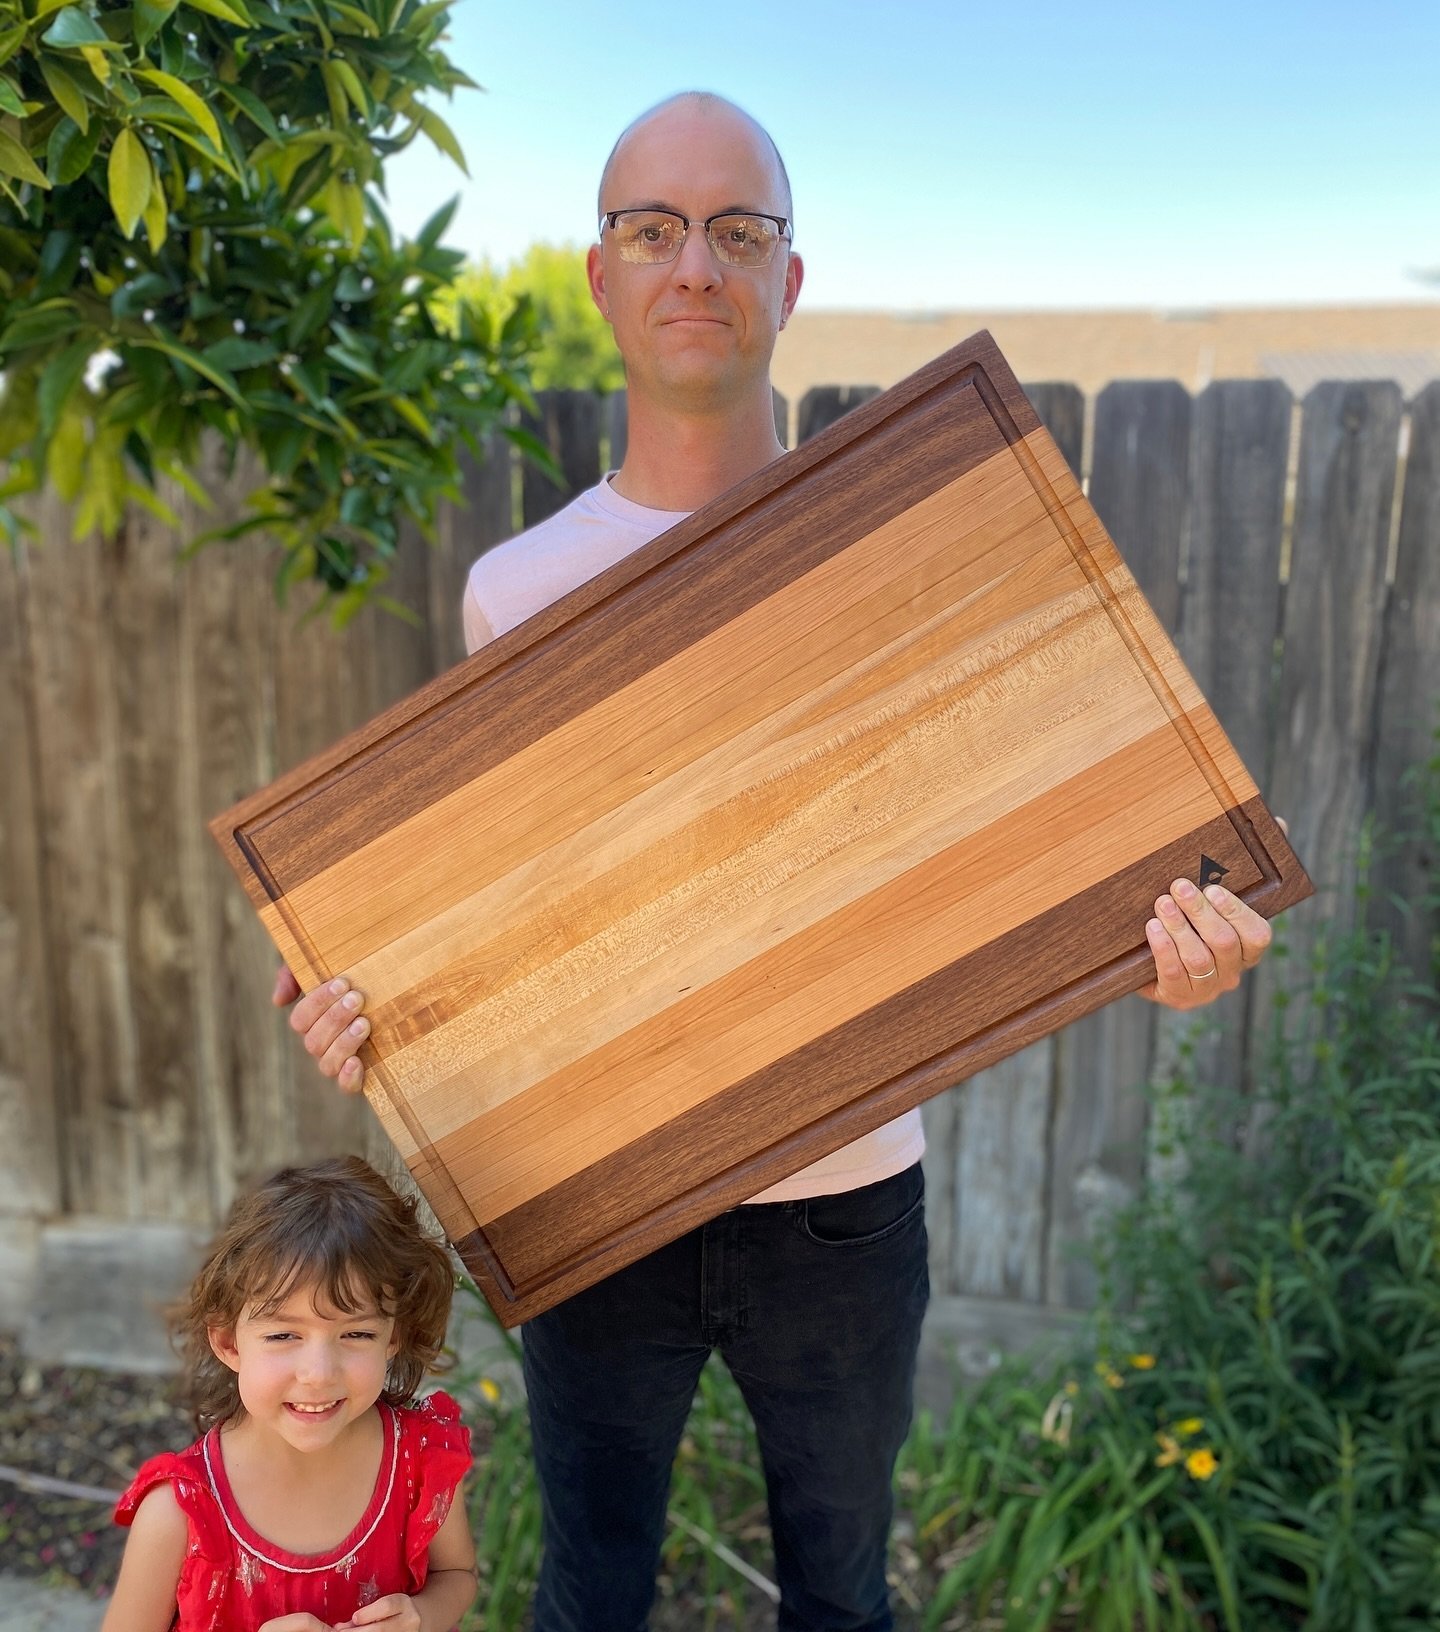 If you visit me at the shop, chances are my middle kid, Winnie, will run out and offer you a flower from our garden. Here I&rsquo;m holding a monster board of cherry, maple and black walnut moments before its inaugural service. I quite enjoy making t